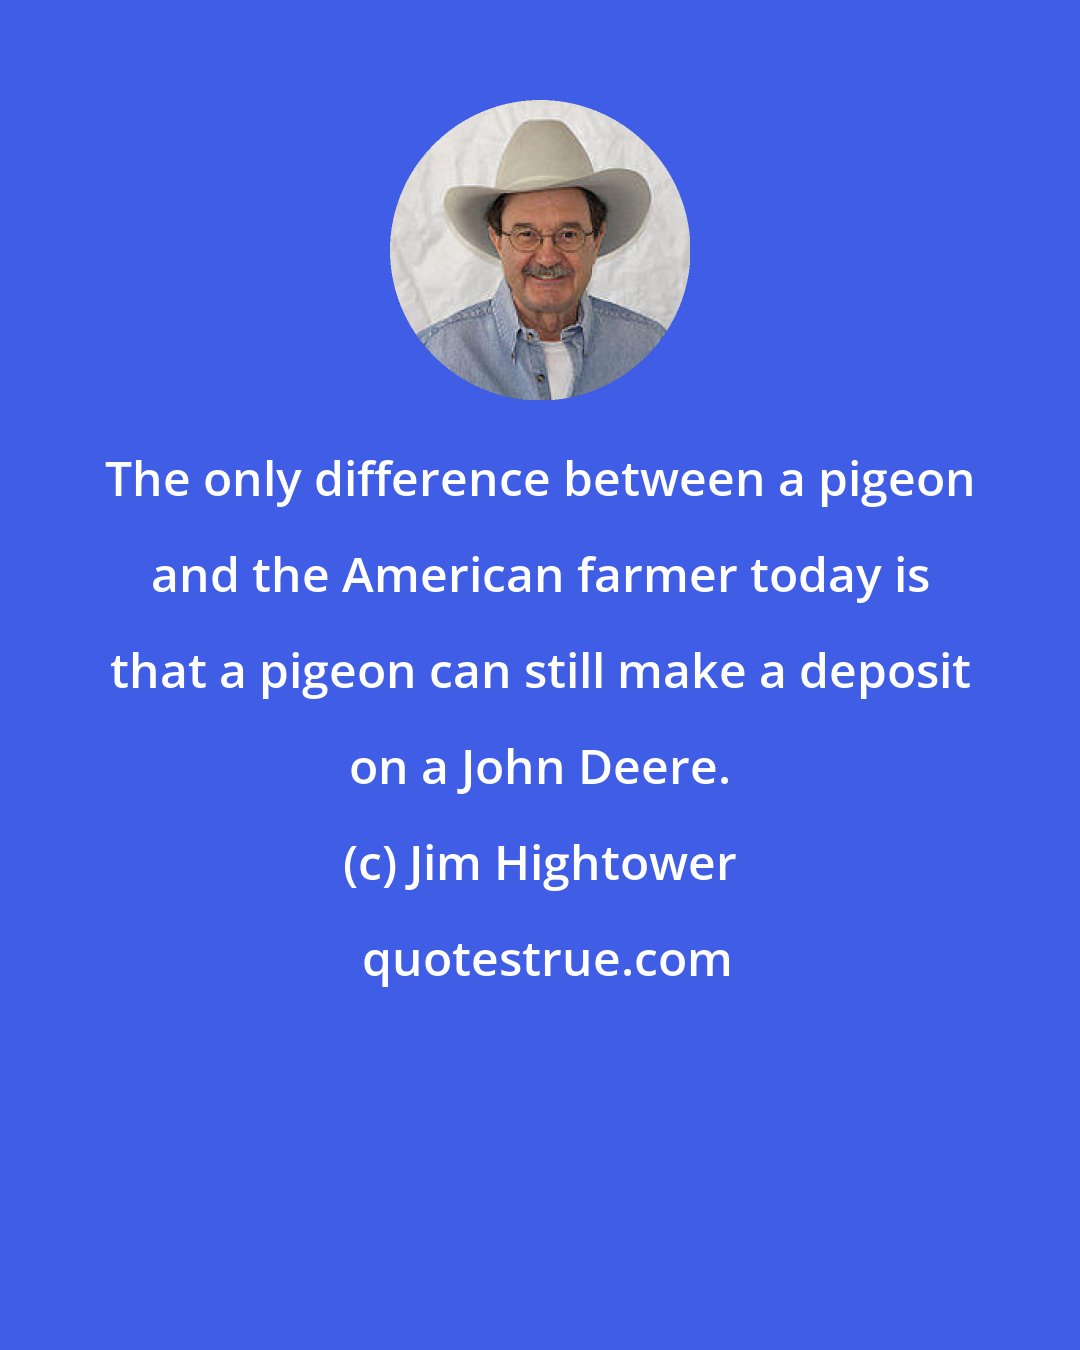 Jim Hightower: The only difference between a pigeon and the American farmer today is that a pigeon can still make a deposit on a John Deere.